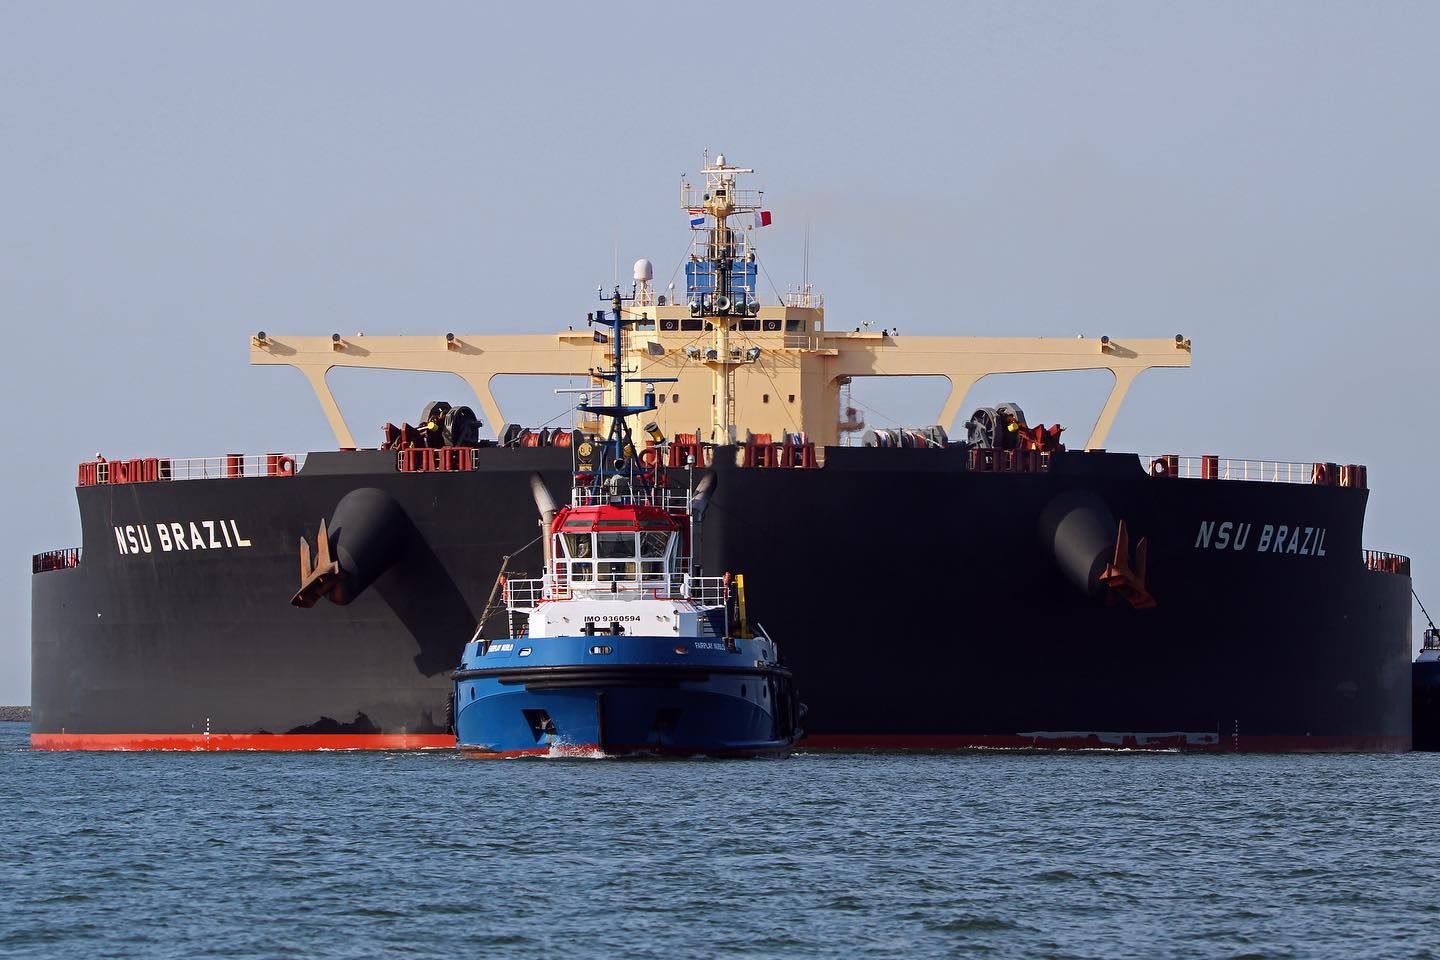 This Unit is the biggest bulk Carrier in the World - NSU Brazil.